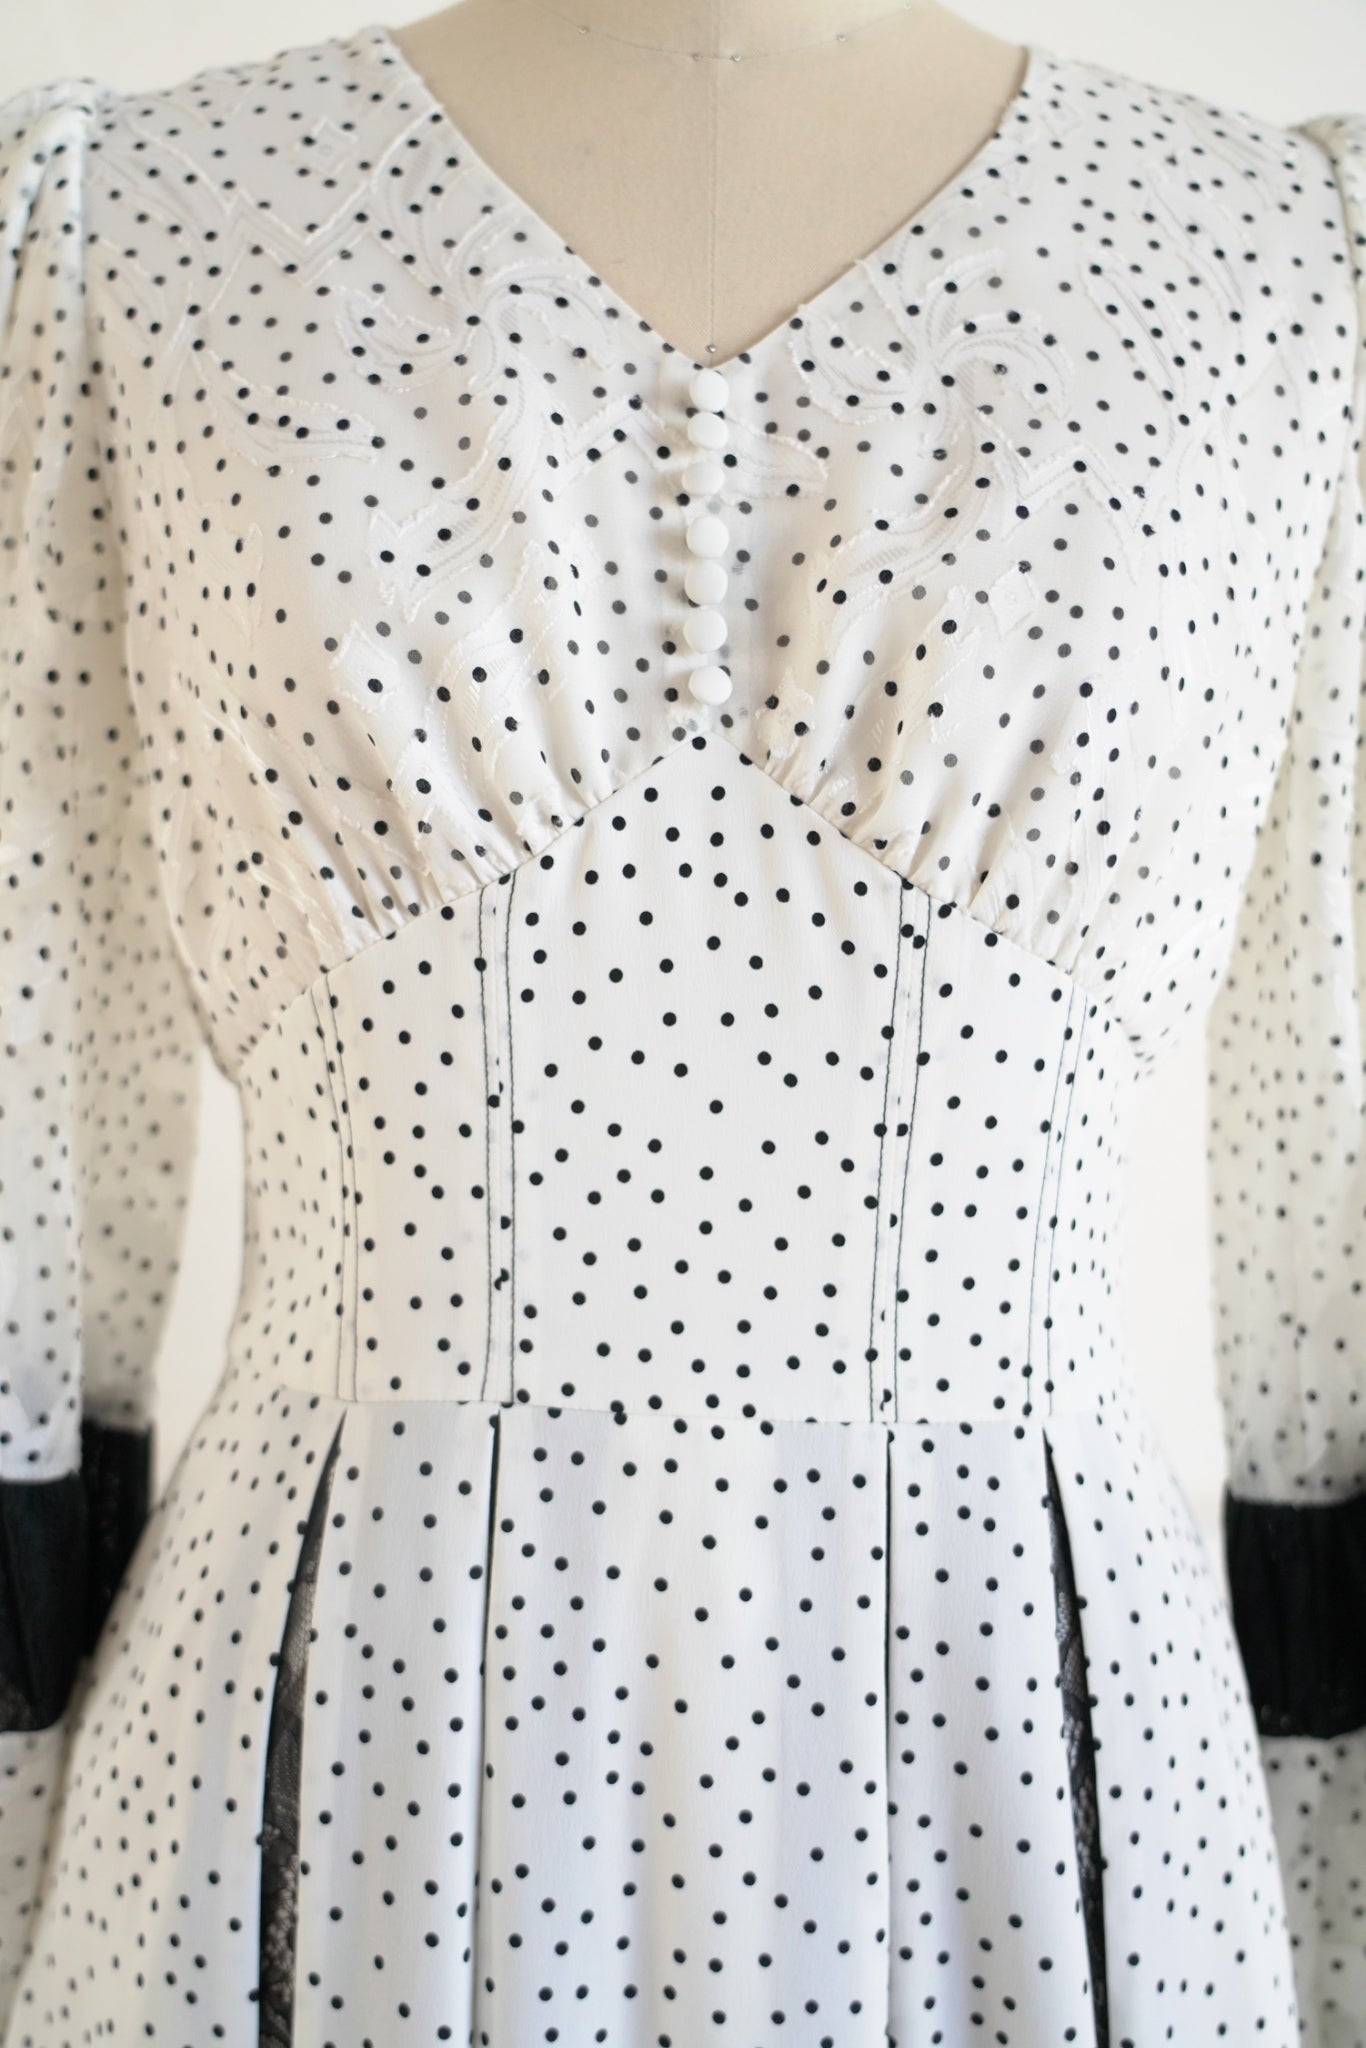 her lip to Lace-trimmed Pin Dot Dress